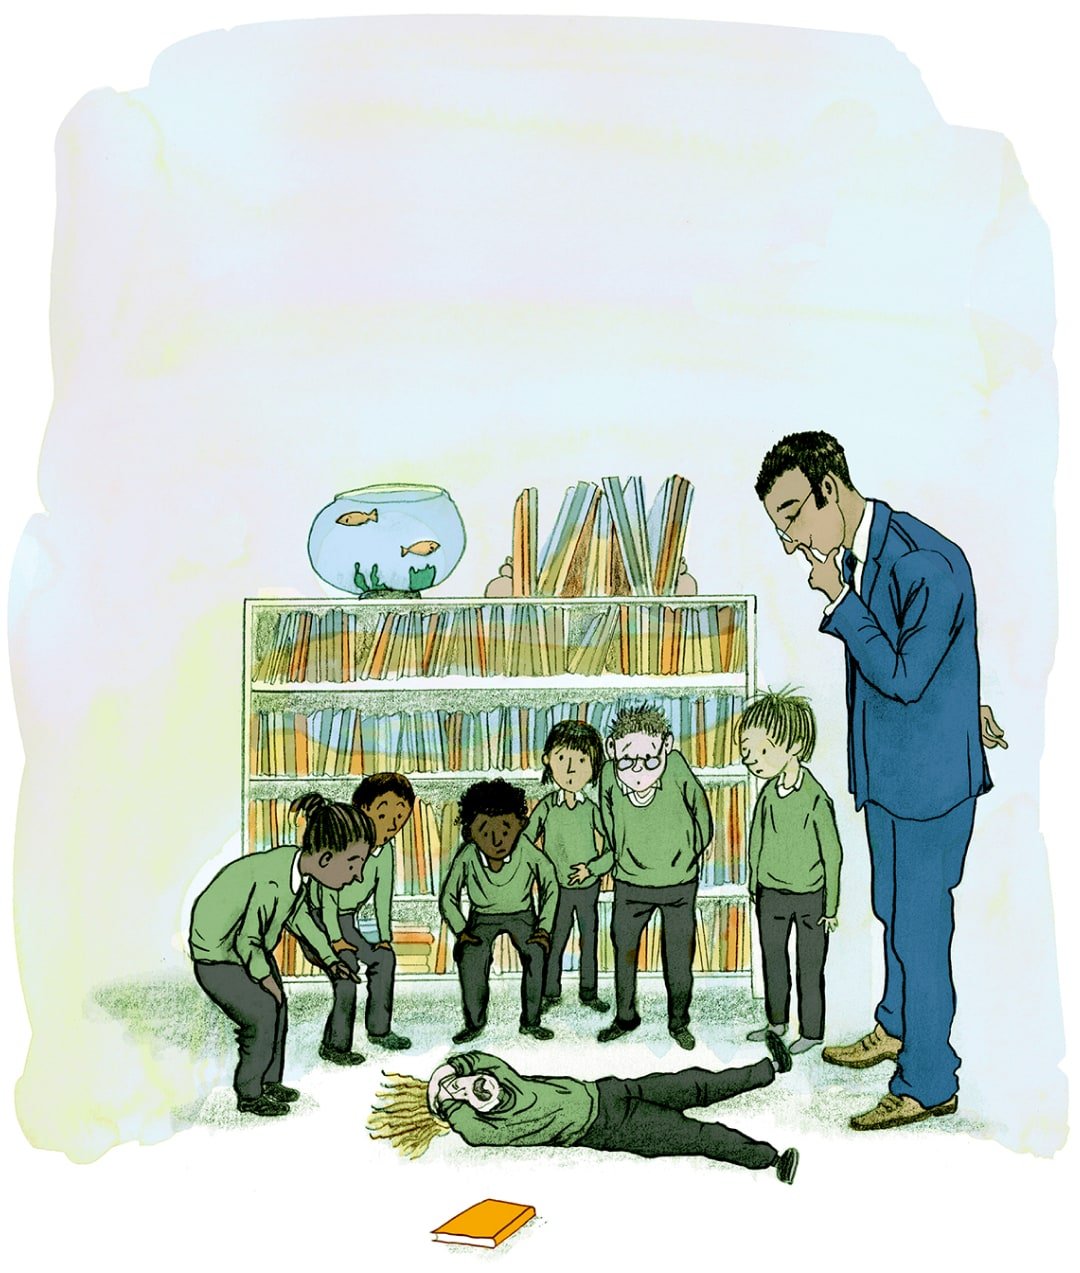 A group of boys in green school uniform stand with their teacher in a blue suit. They are all looking down at their friend lying on the floor next to a book, crying. Everyone looks concerned. Behind them stands a bookshelf, with a goldfish bowl on top.